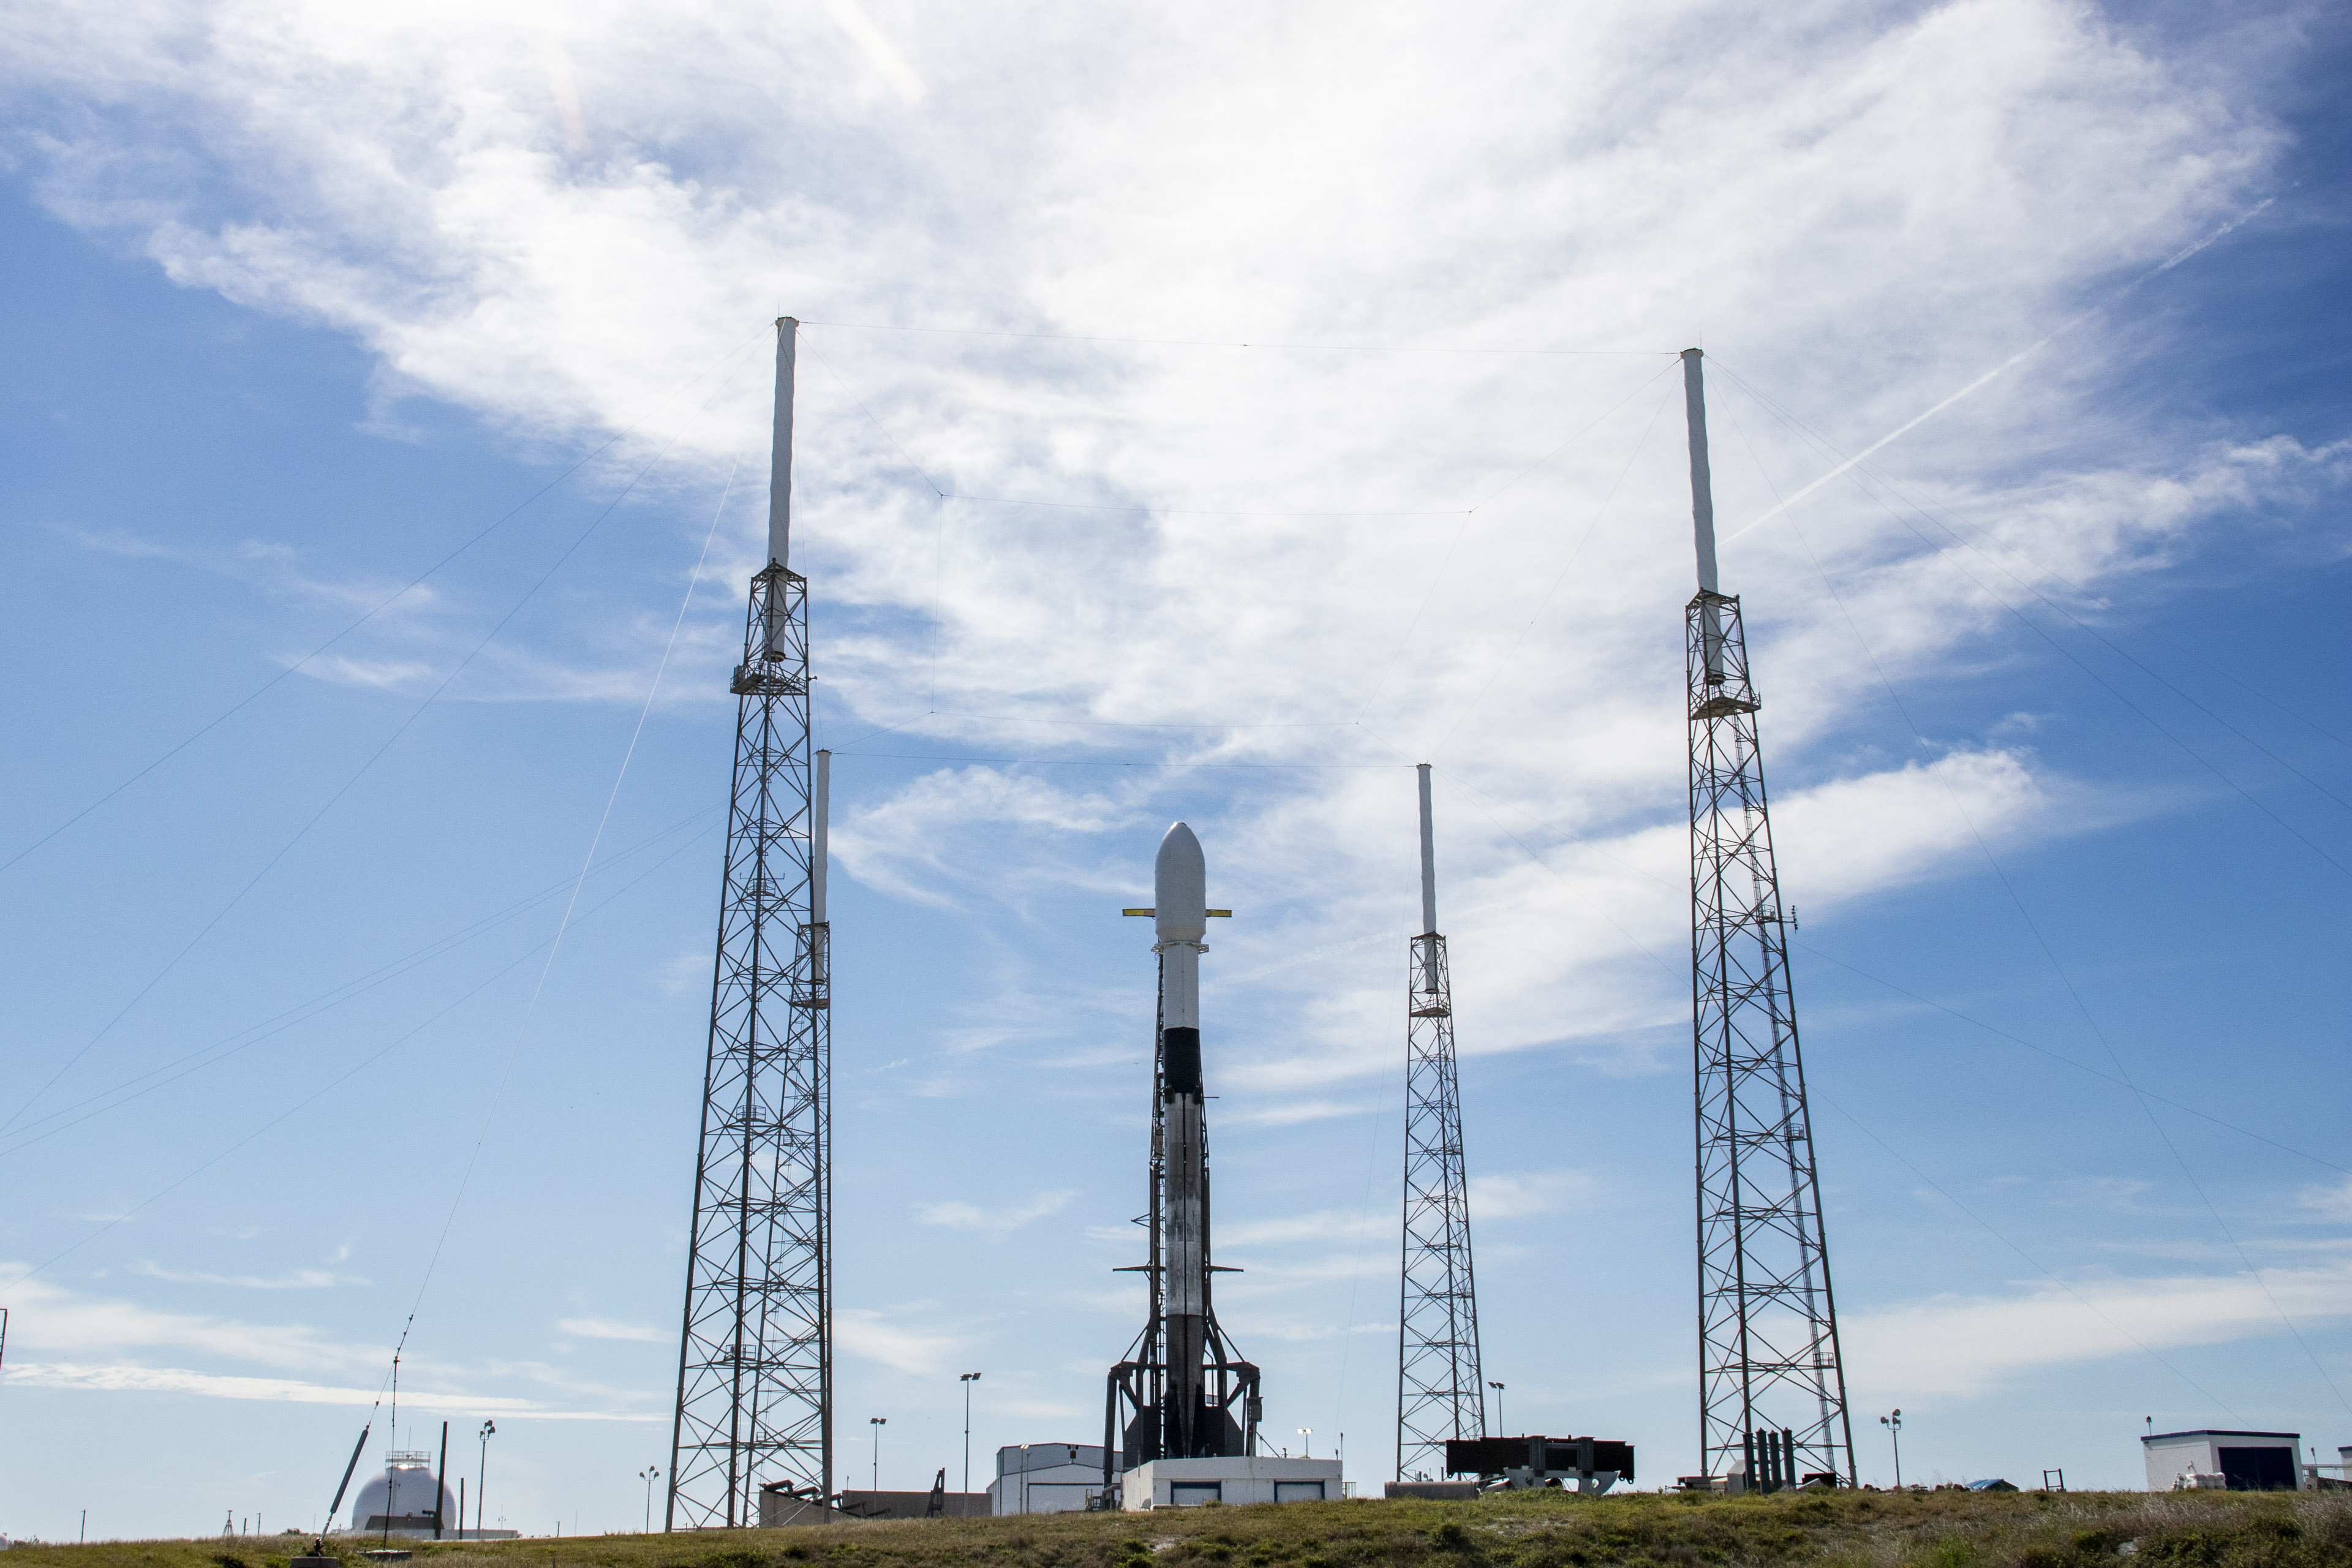 SpaceX Again Delays Starlink Internet Satellite Launch - The New